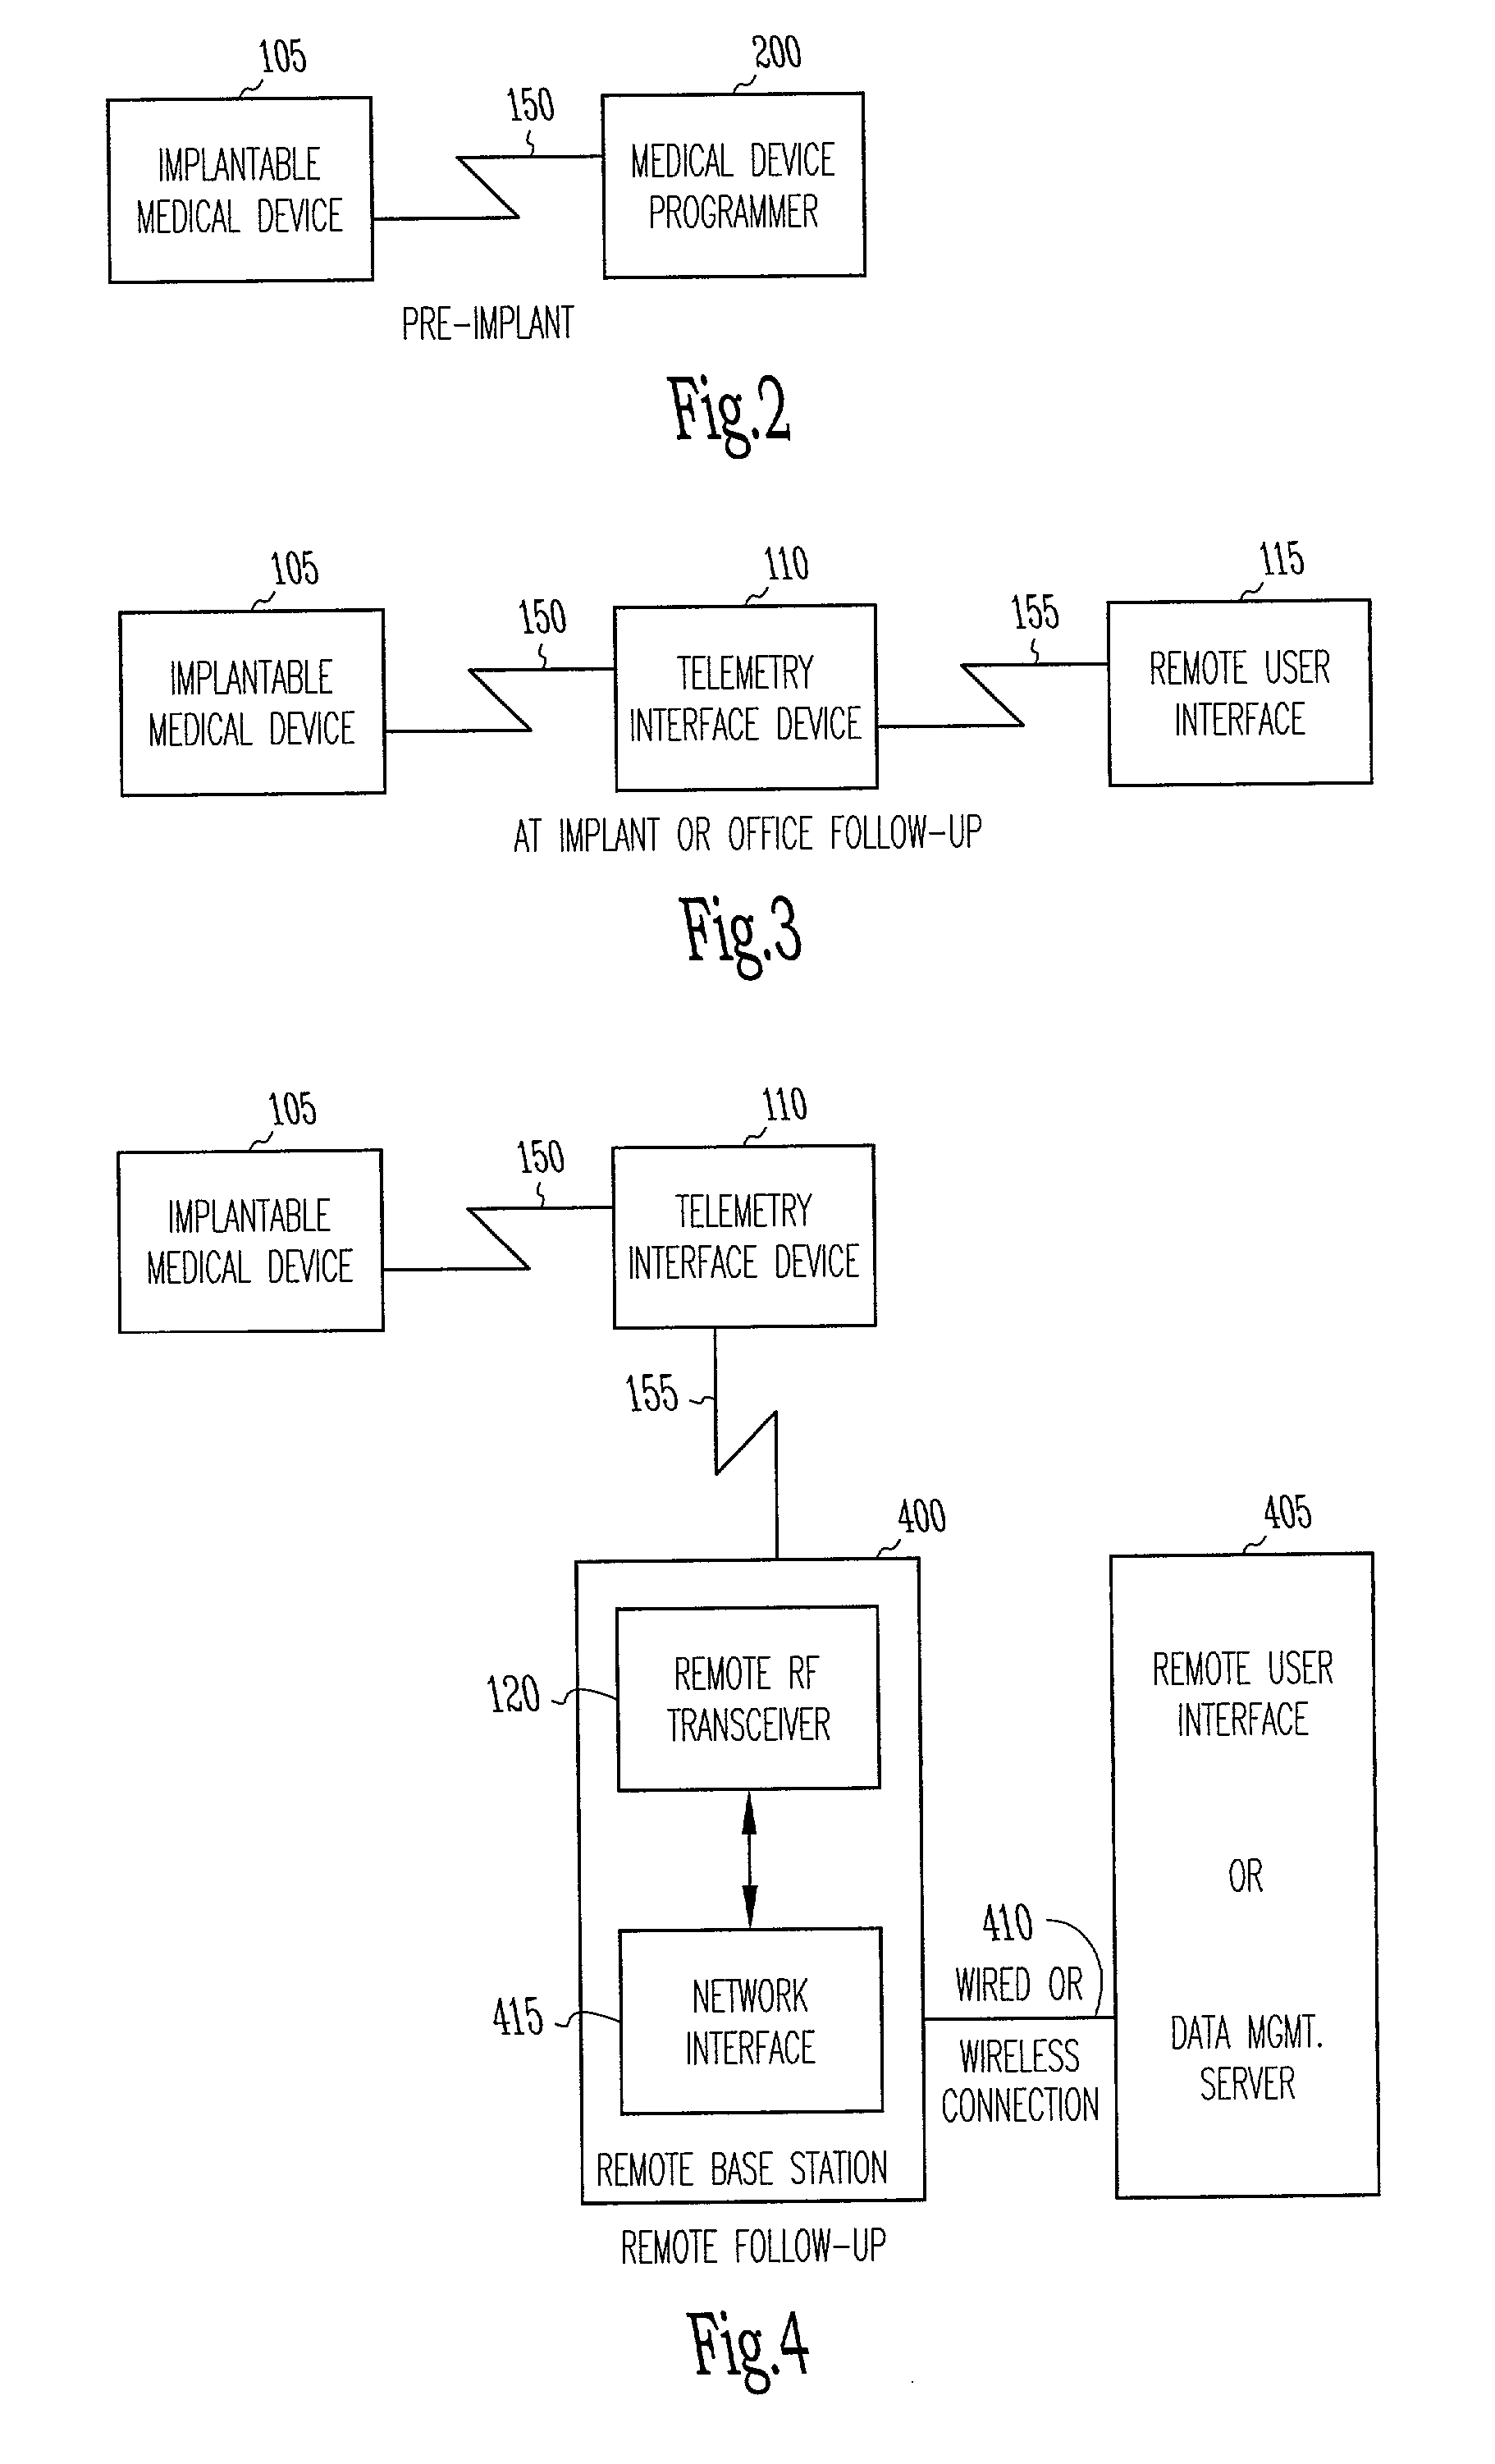 Two-hop telemetry interface for medical device